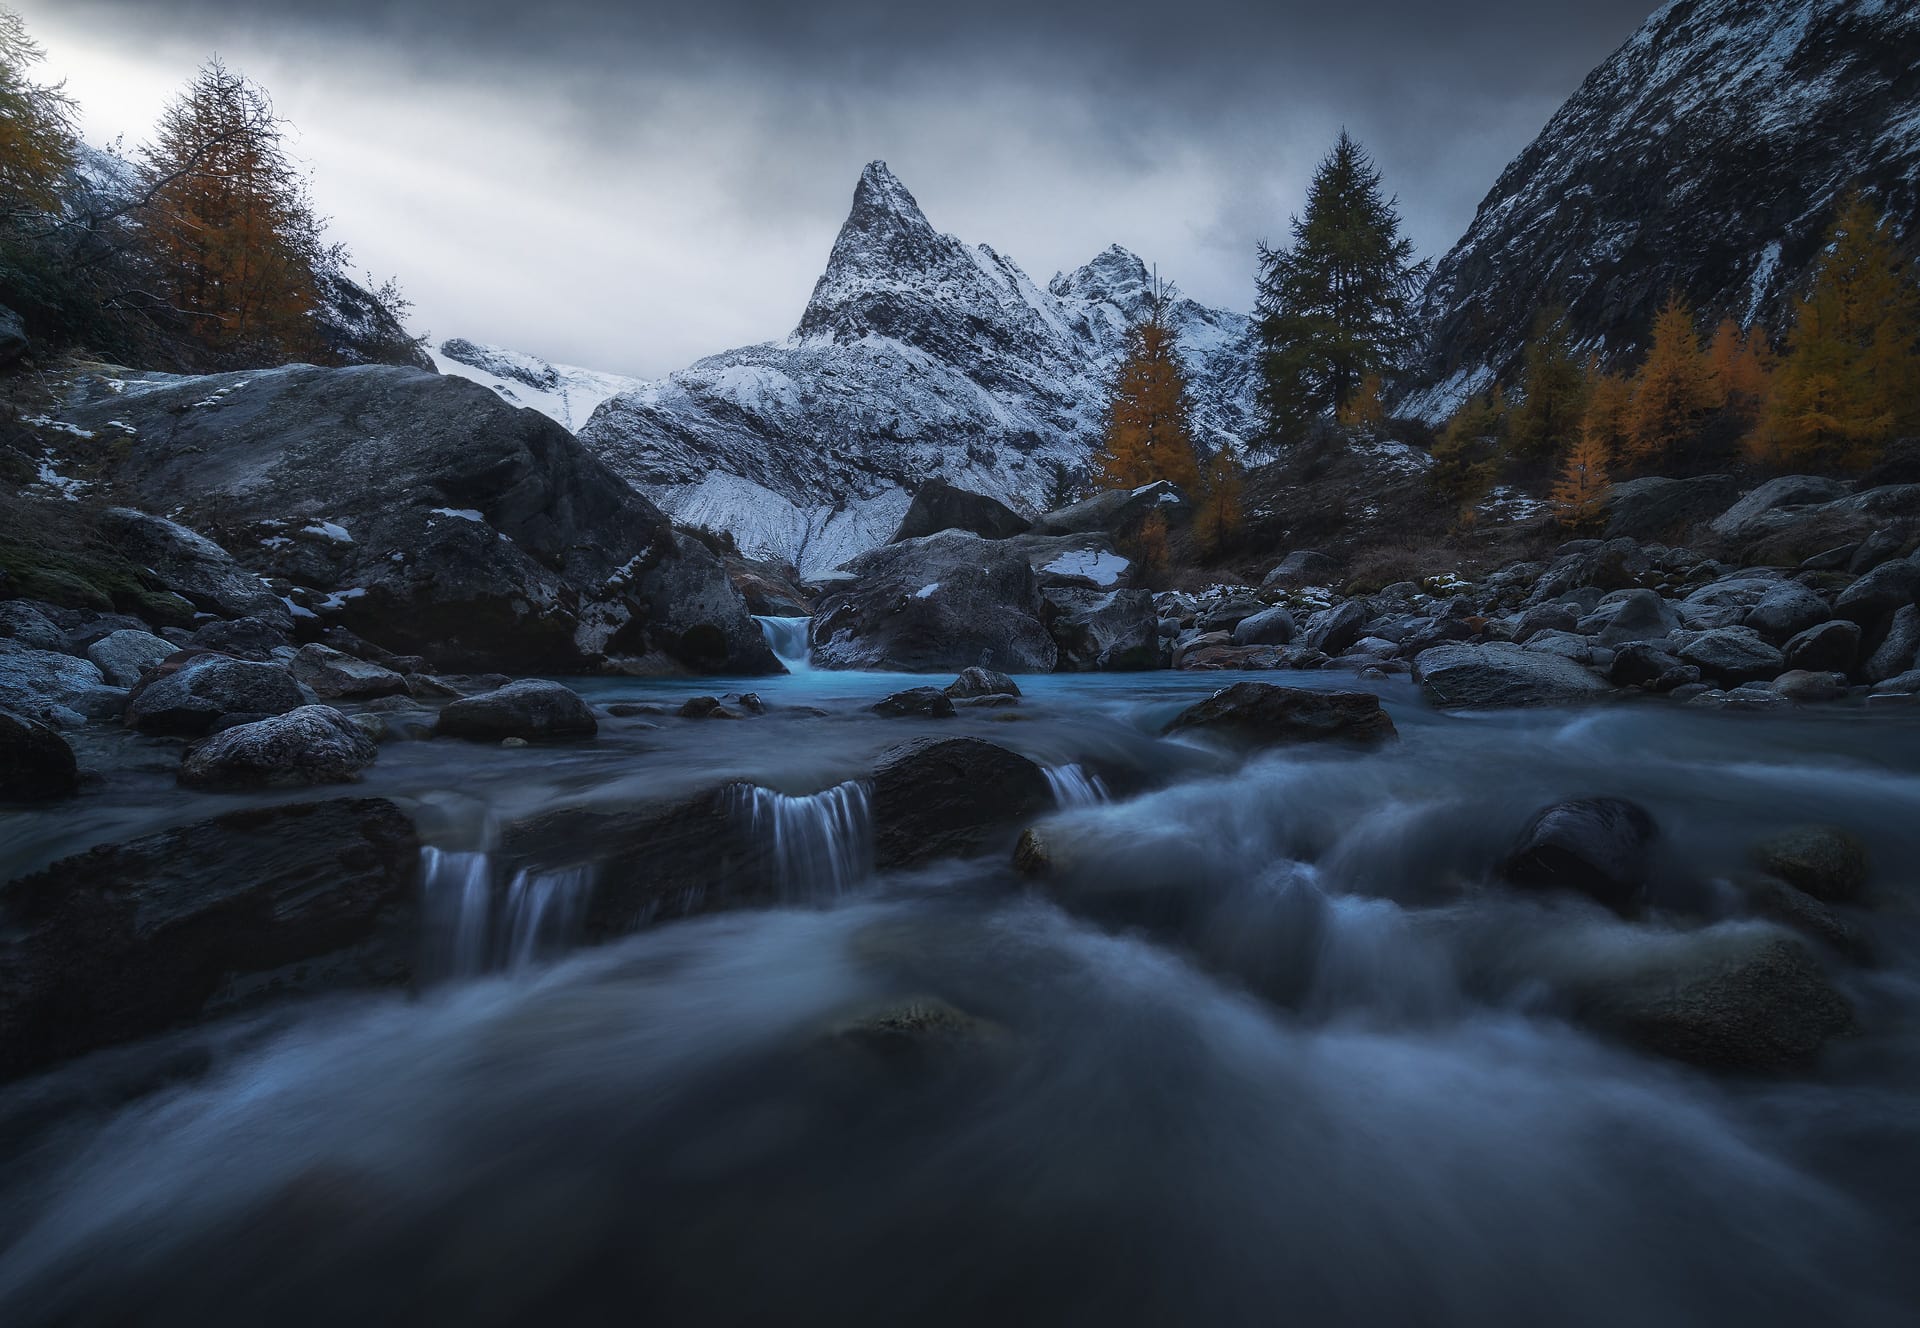 Learn landscape photography from award-winning photographers